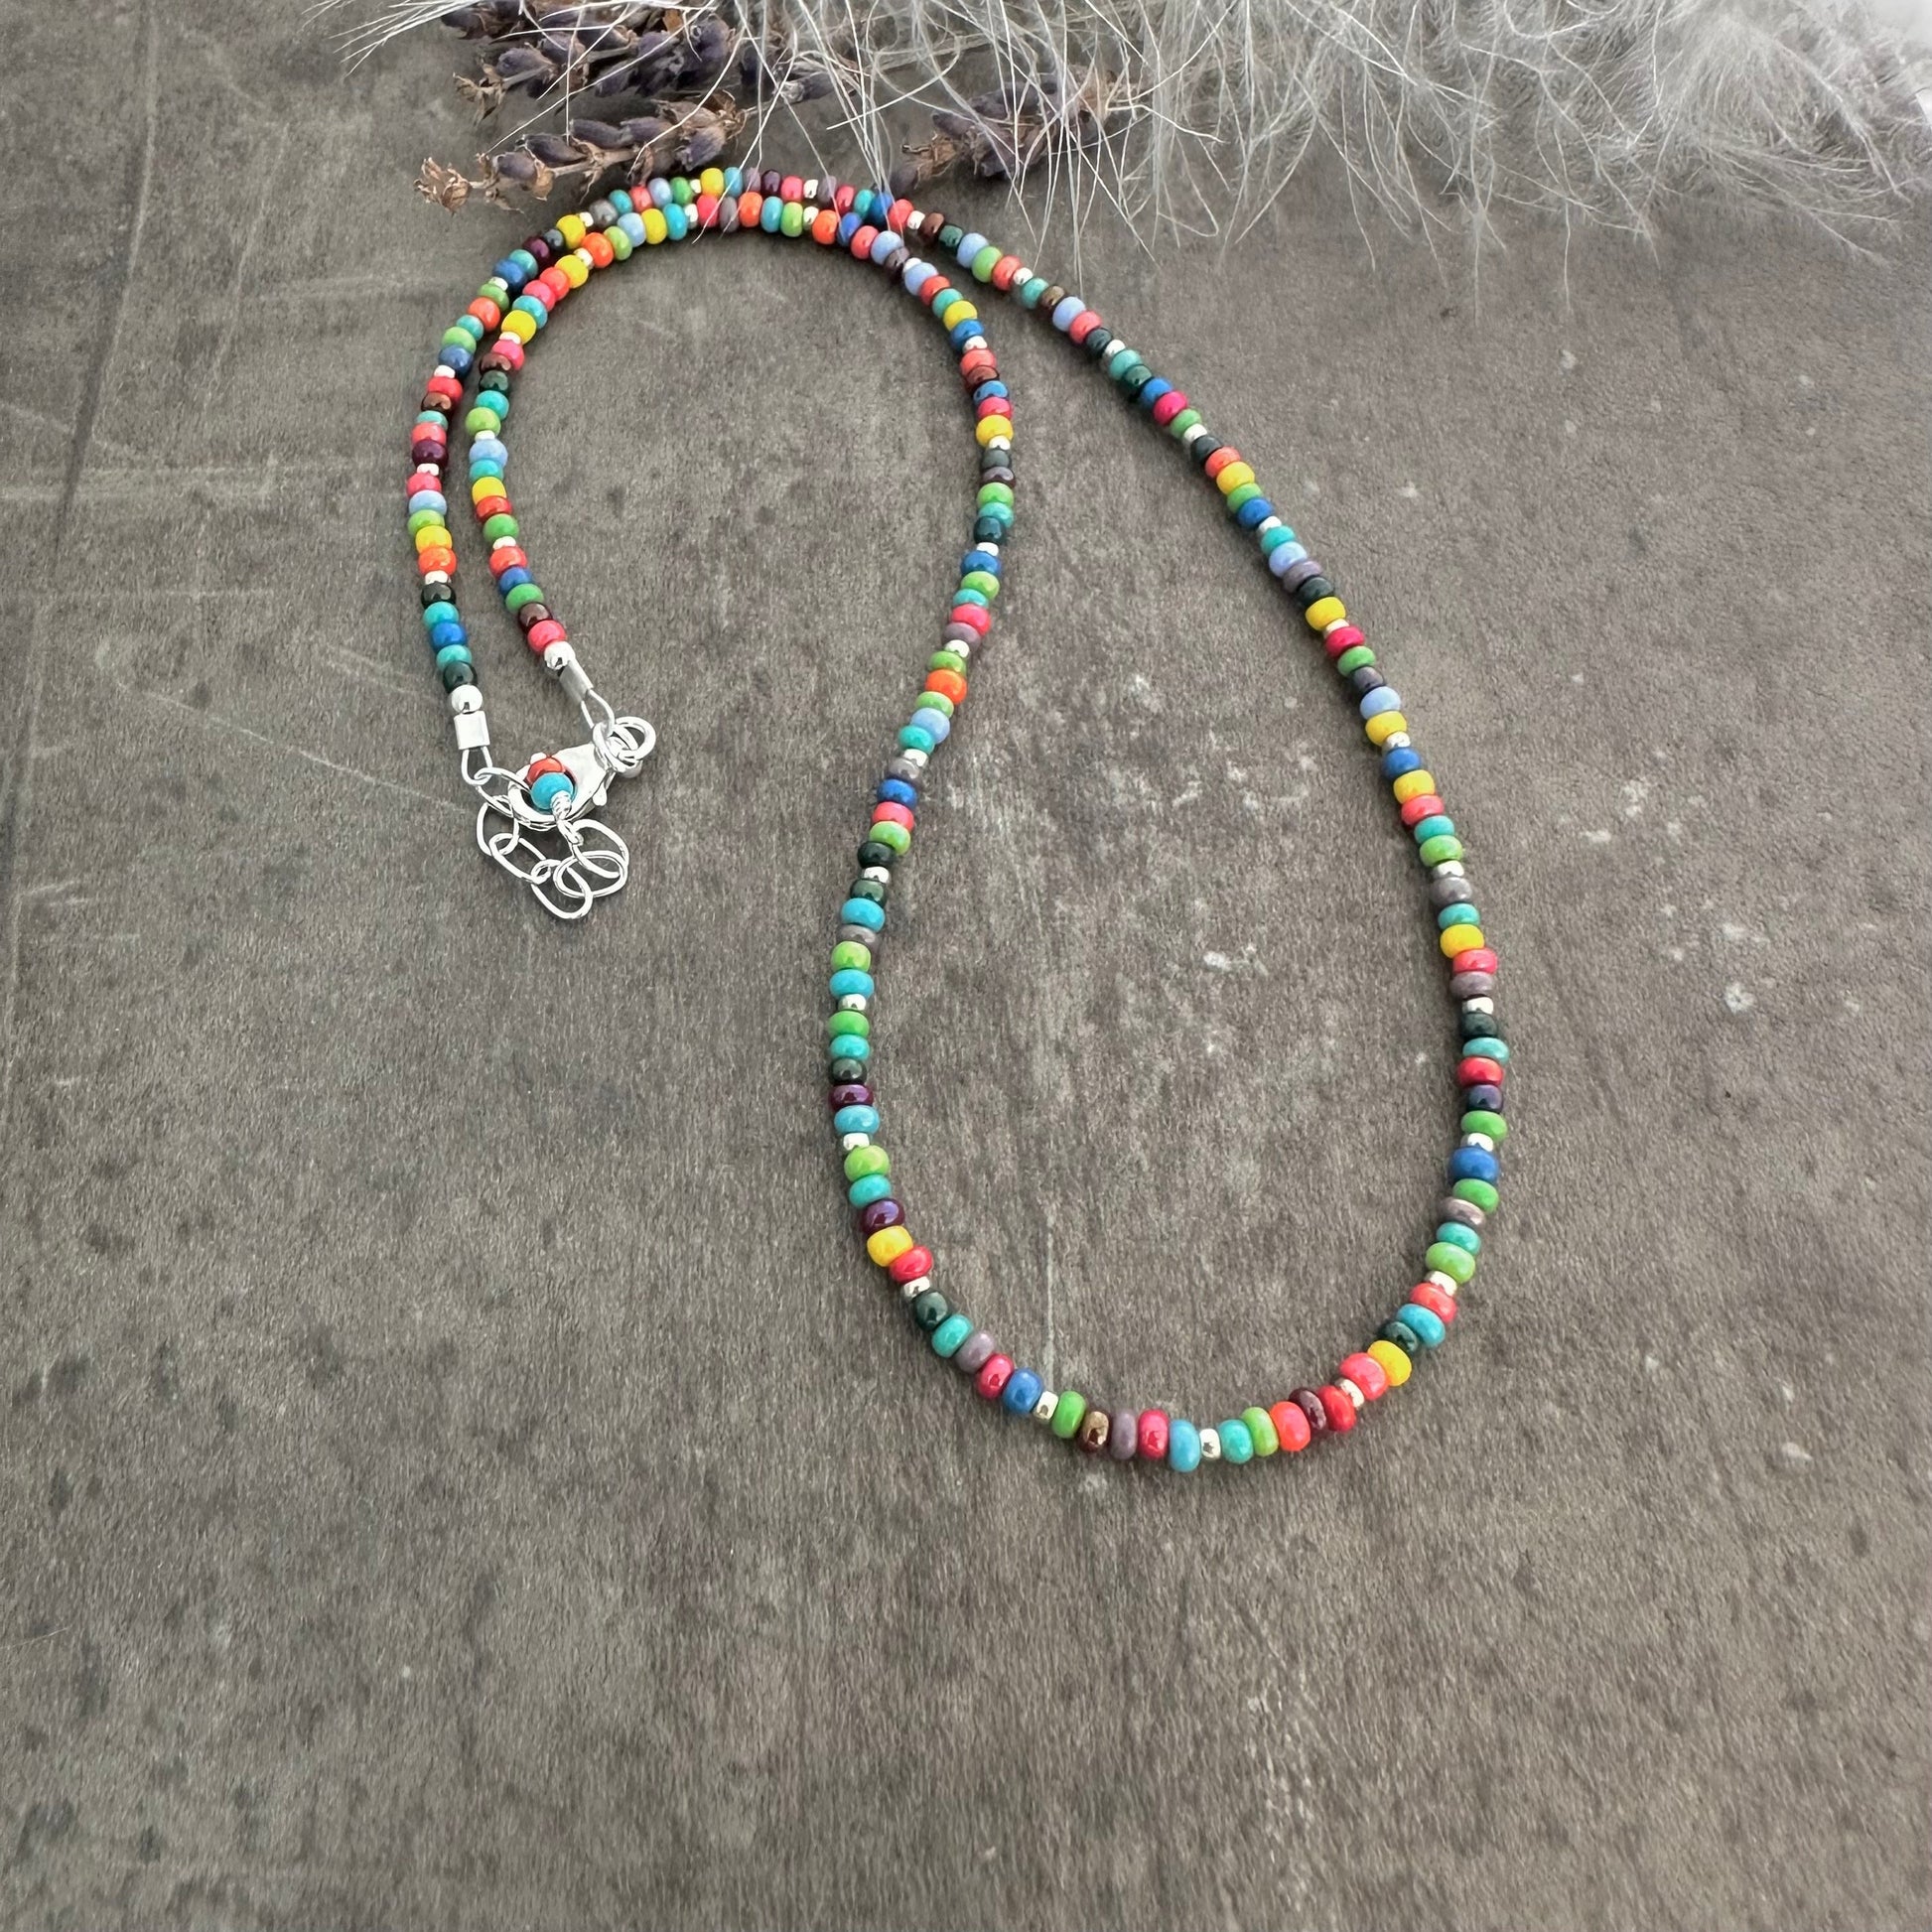 Colourful Summer Beaded Necklace with seed beads